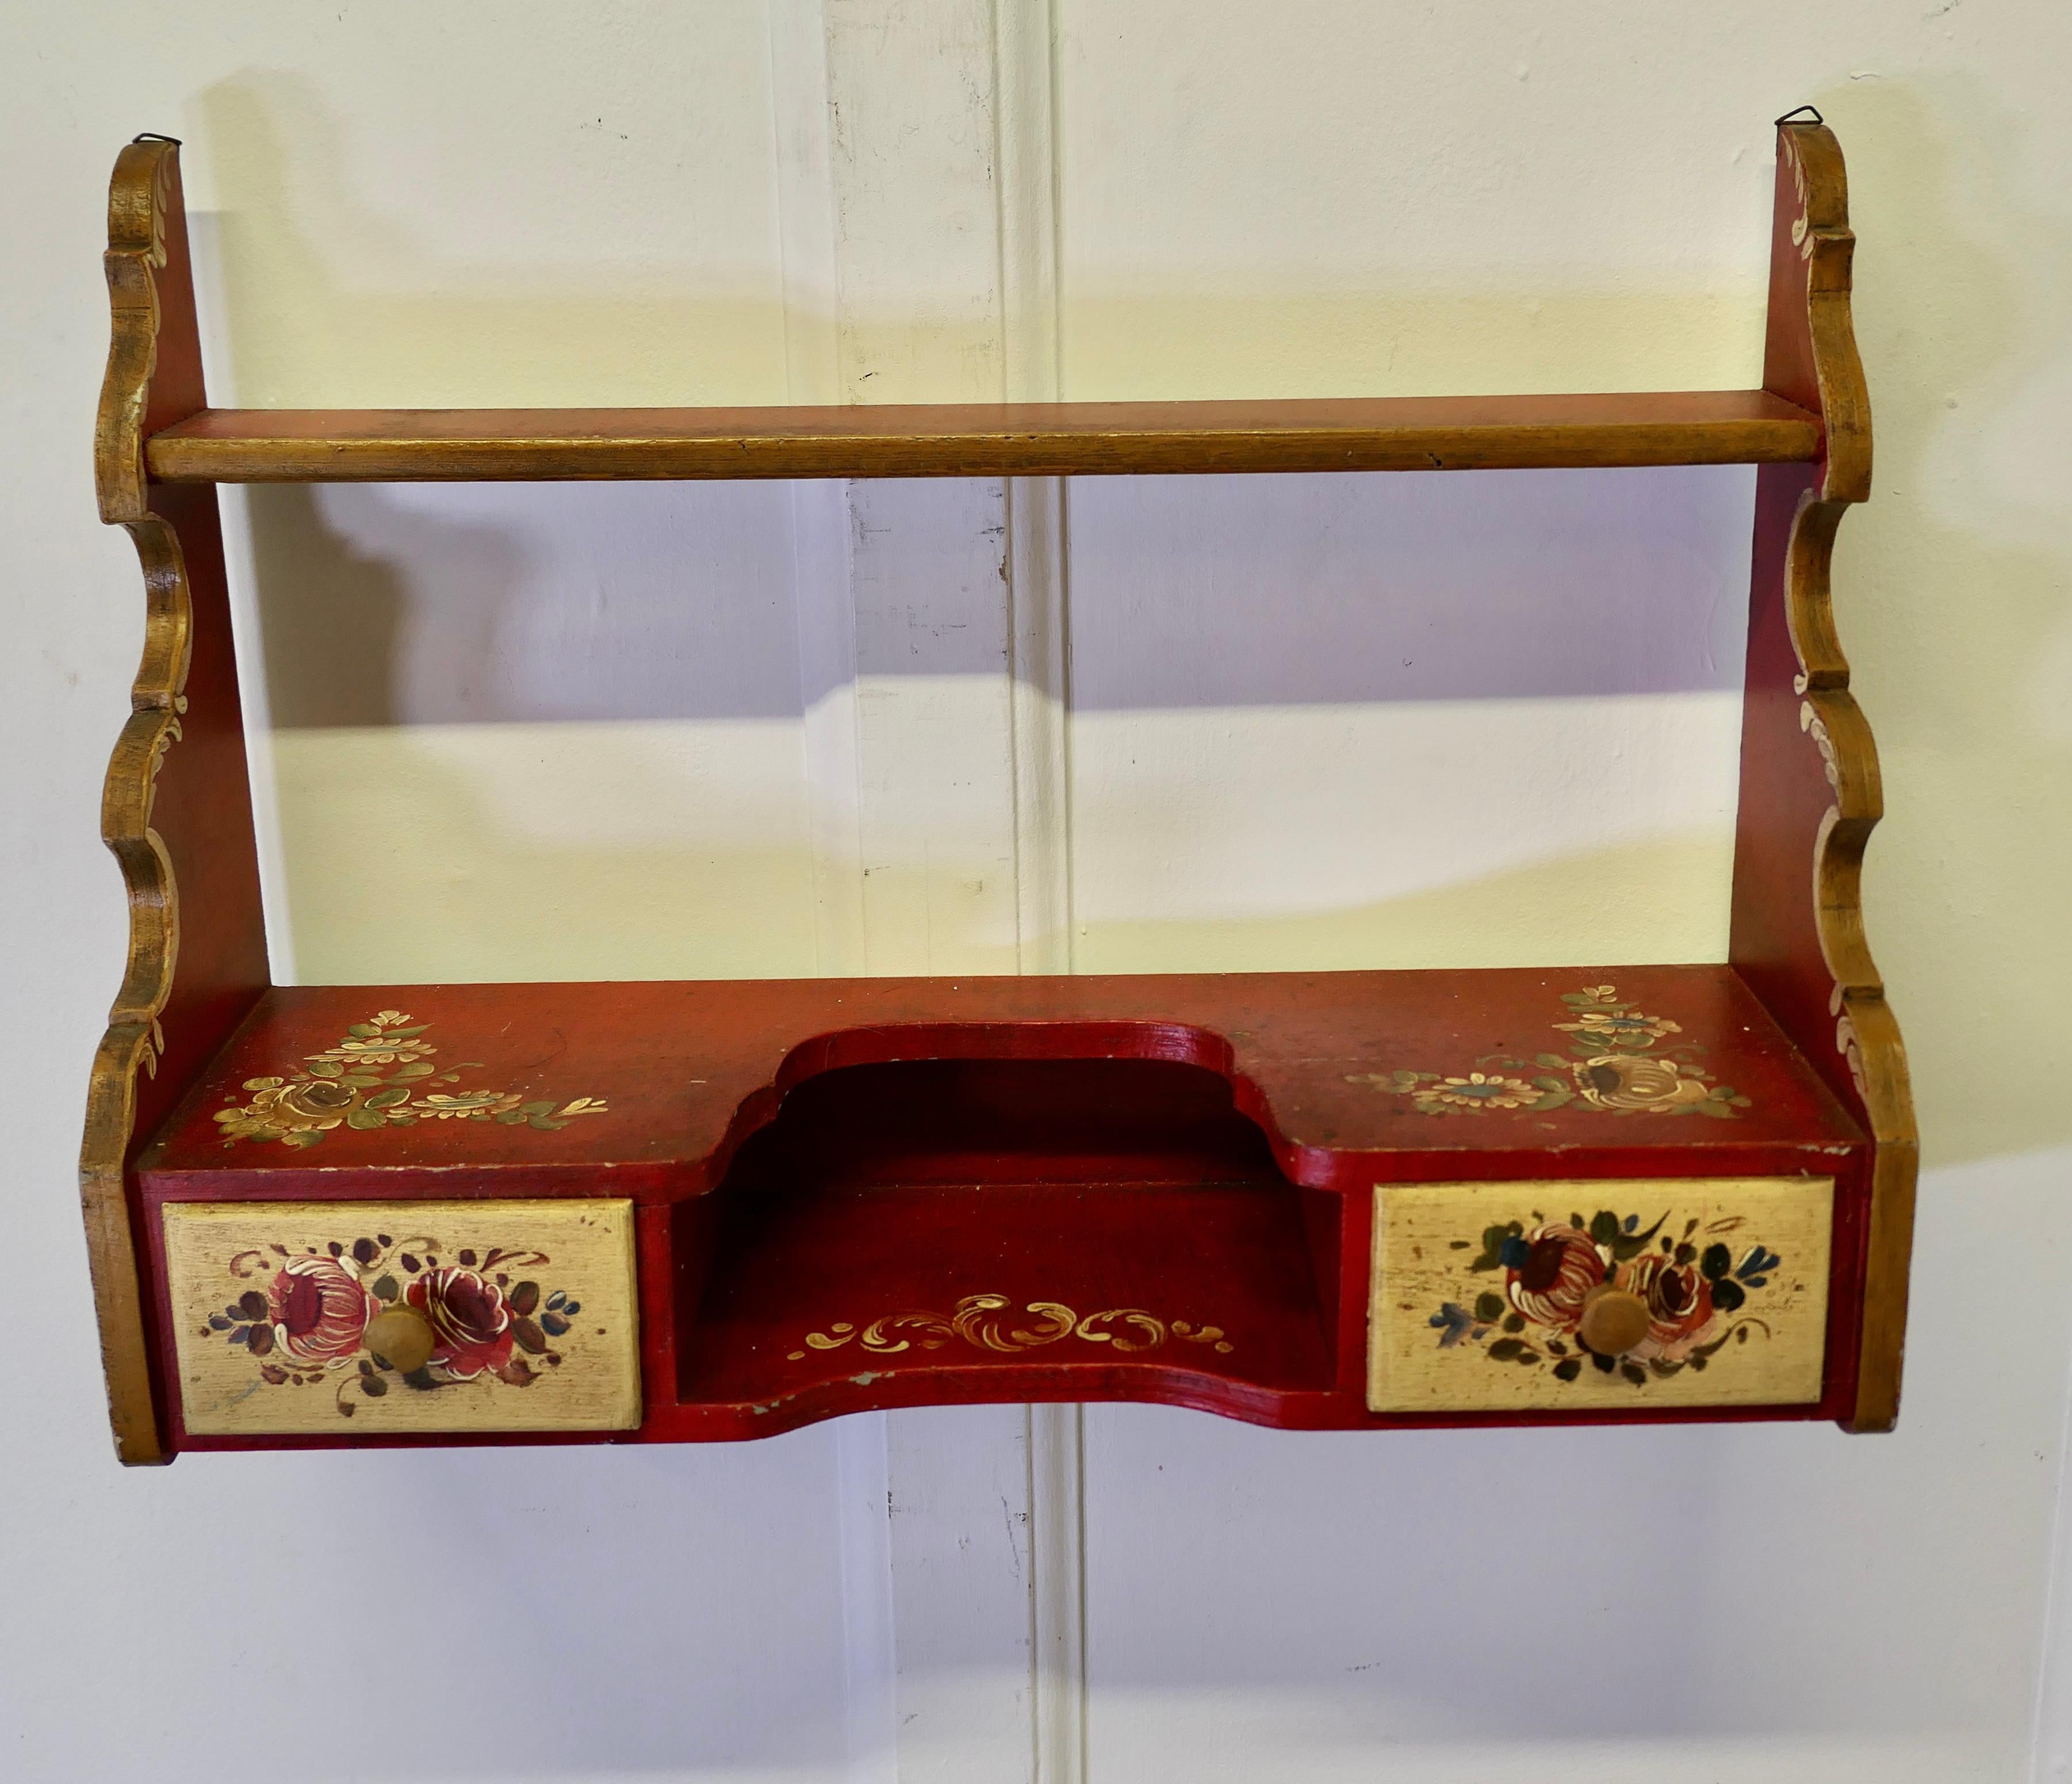 Rustic Painted Folk Art Wall Shelf with Drawers In Good Condition For Sale In Chillerton, Isle of Wight